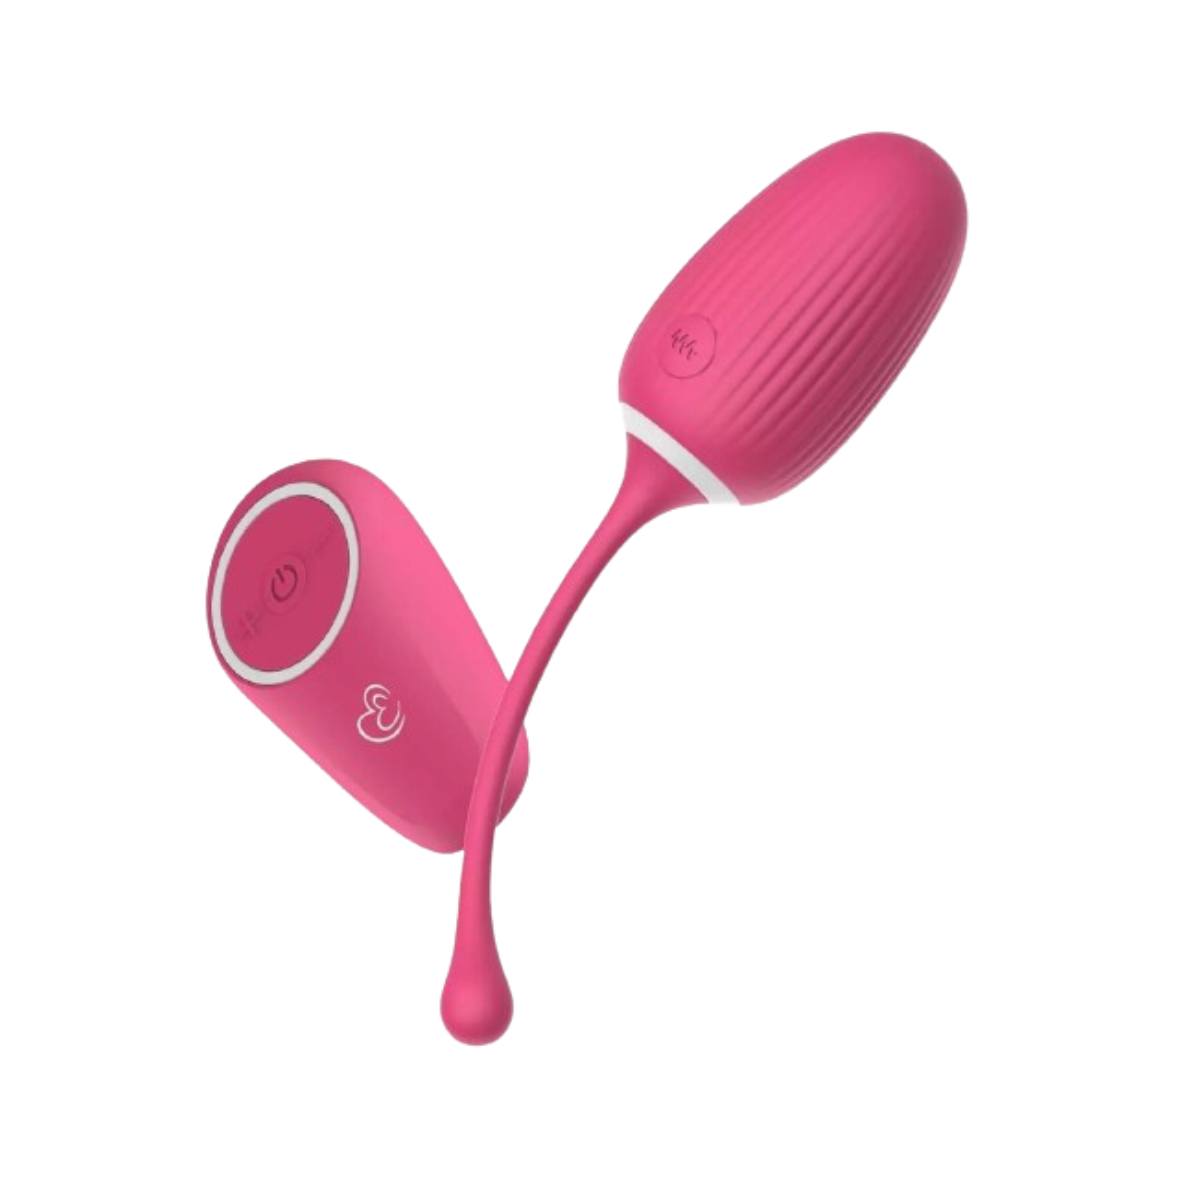 Easy Toys - Egg Play: Pink